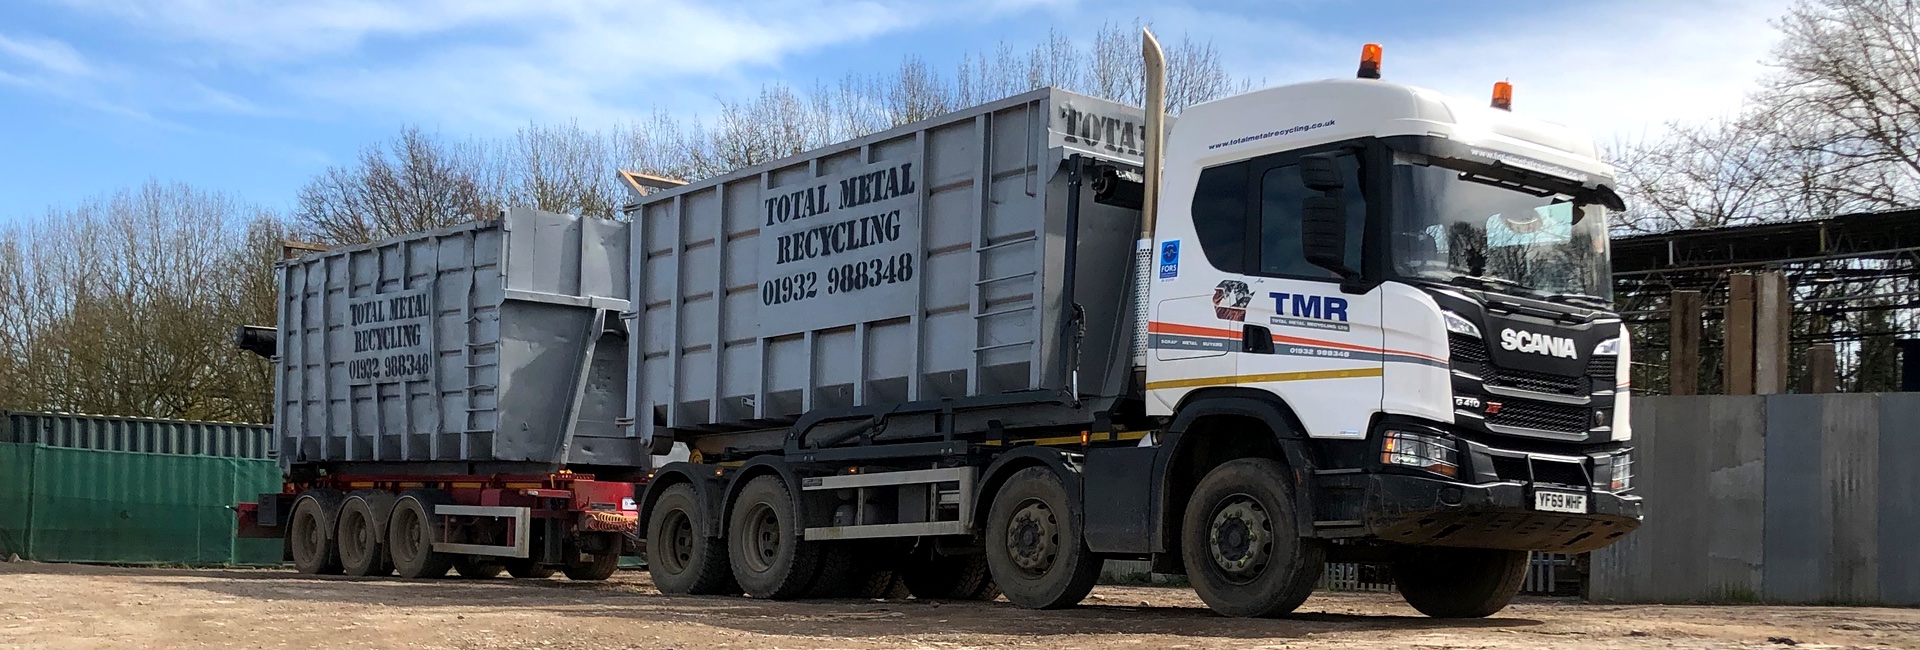 Total Metal Recycling truck with Roll on off Bins